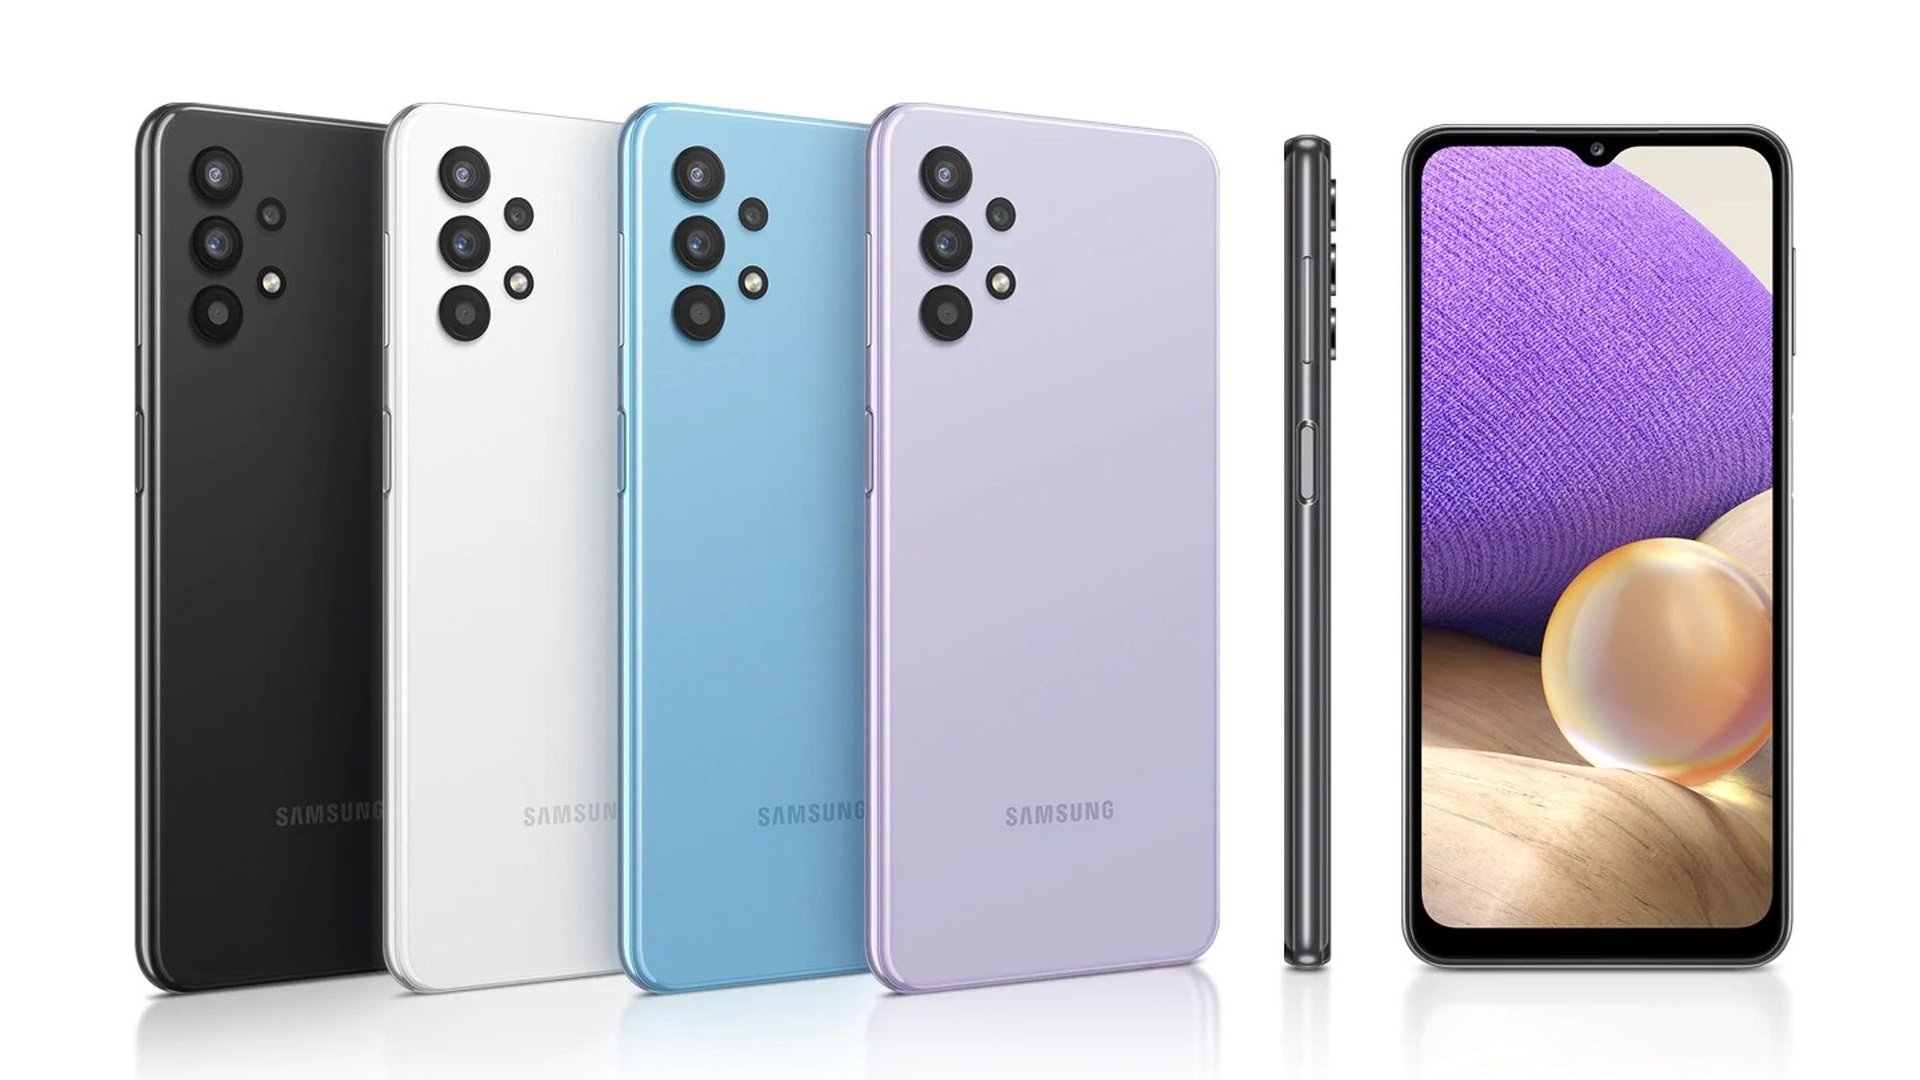 Galaxy S20 FE 5G and Galaxy A32 LTE are now getting One UI 5.0 - SamMobile